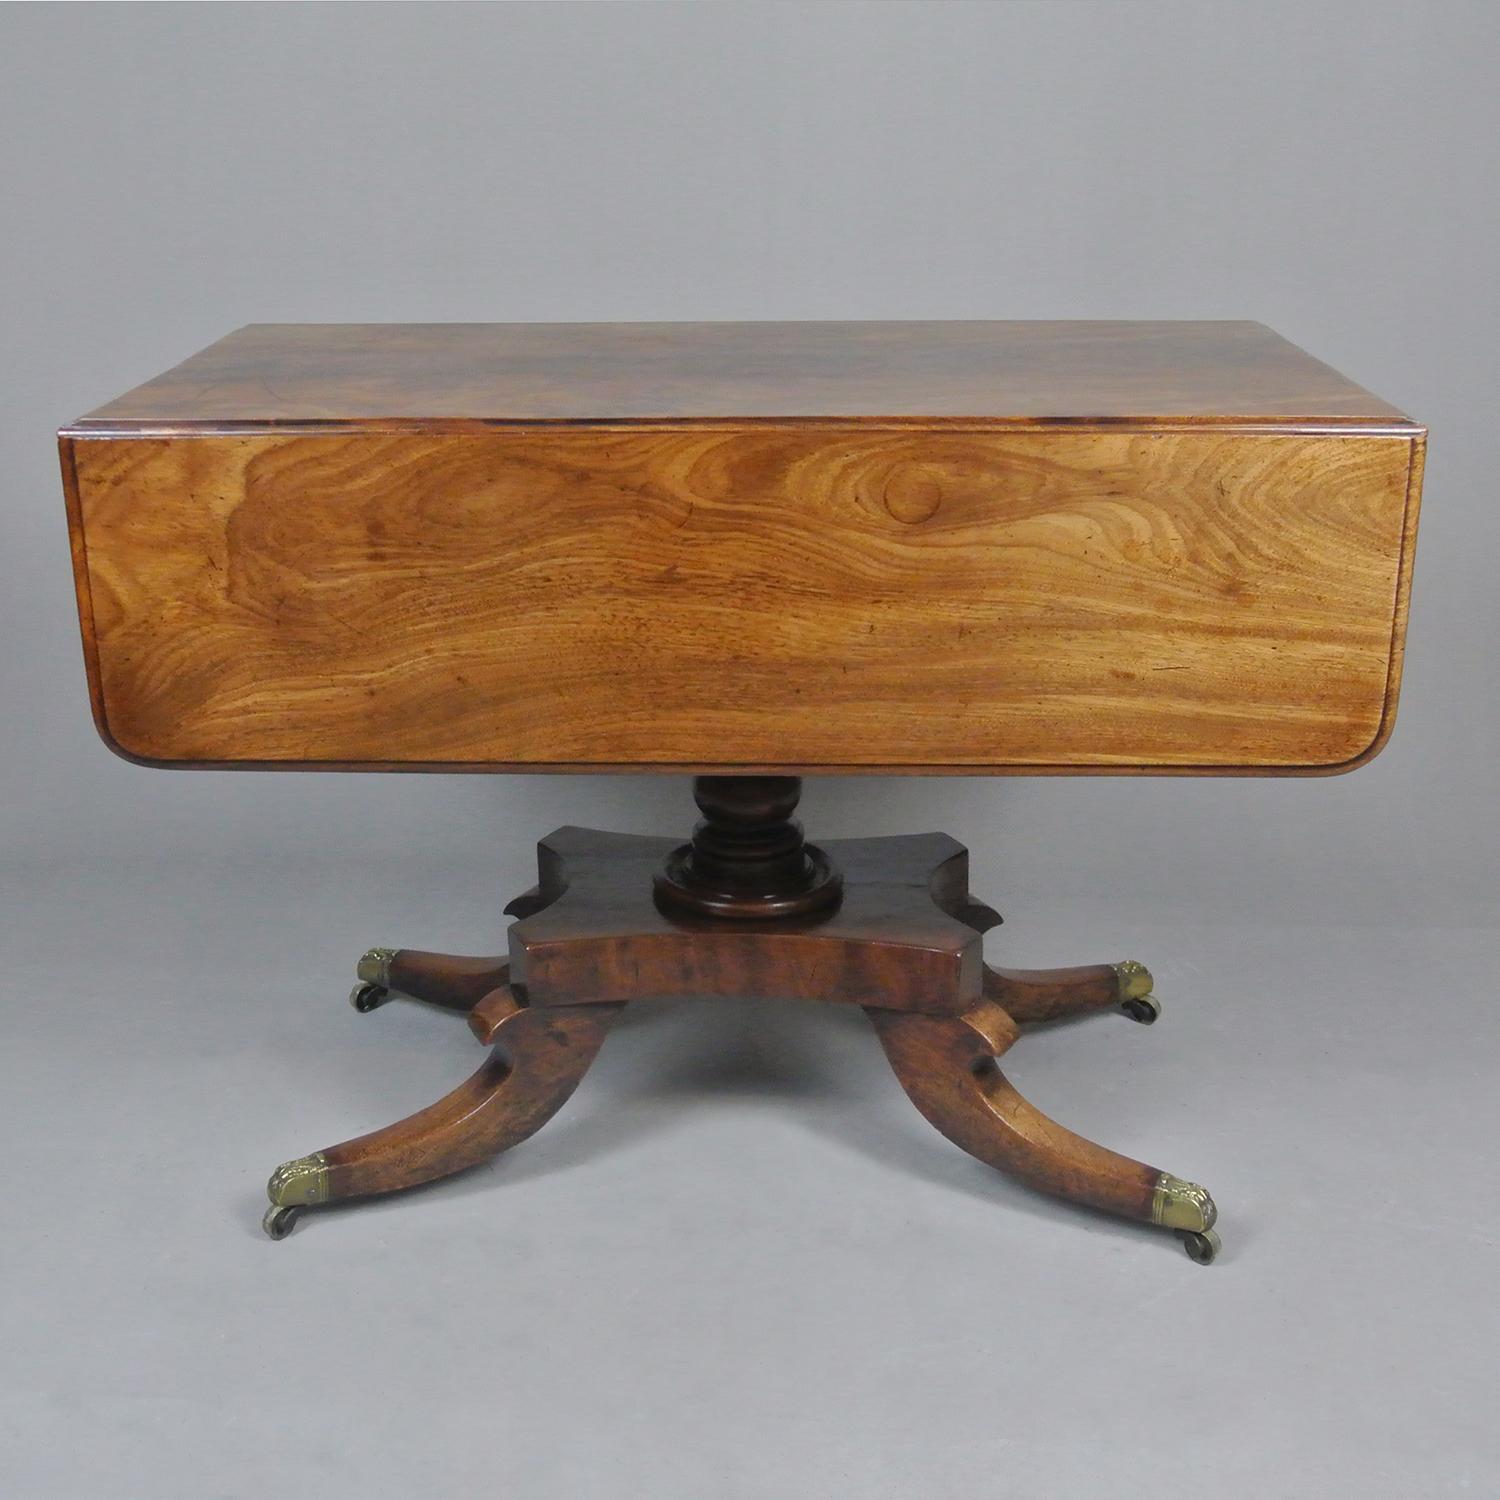 A particularly fine quality mahogany pembroke table. The three part top cut from a single piece of solid Cuban mahogany and beautifully made so that the figuring flows naturally from the leaves and across the bed of the table and the grain is